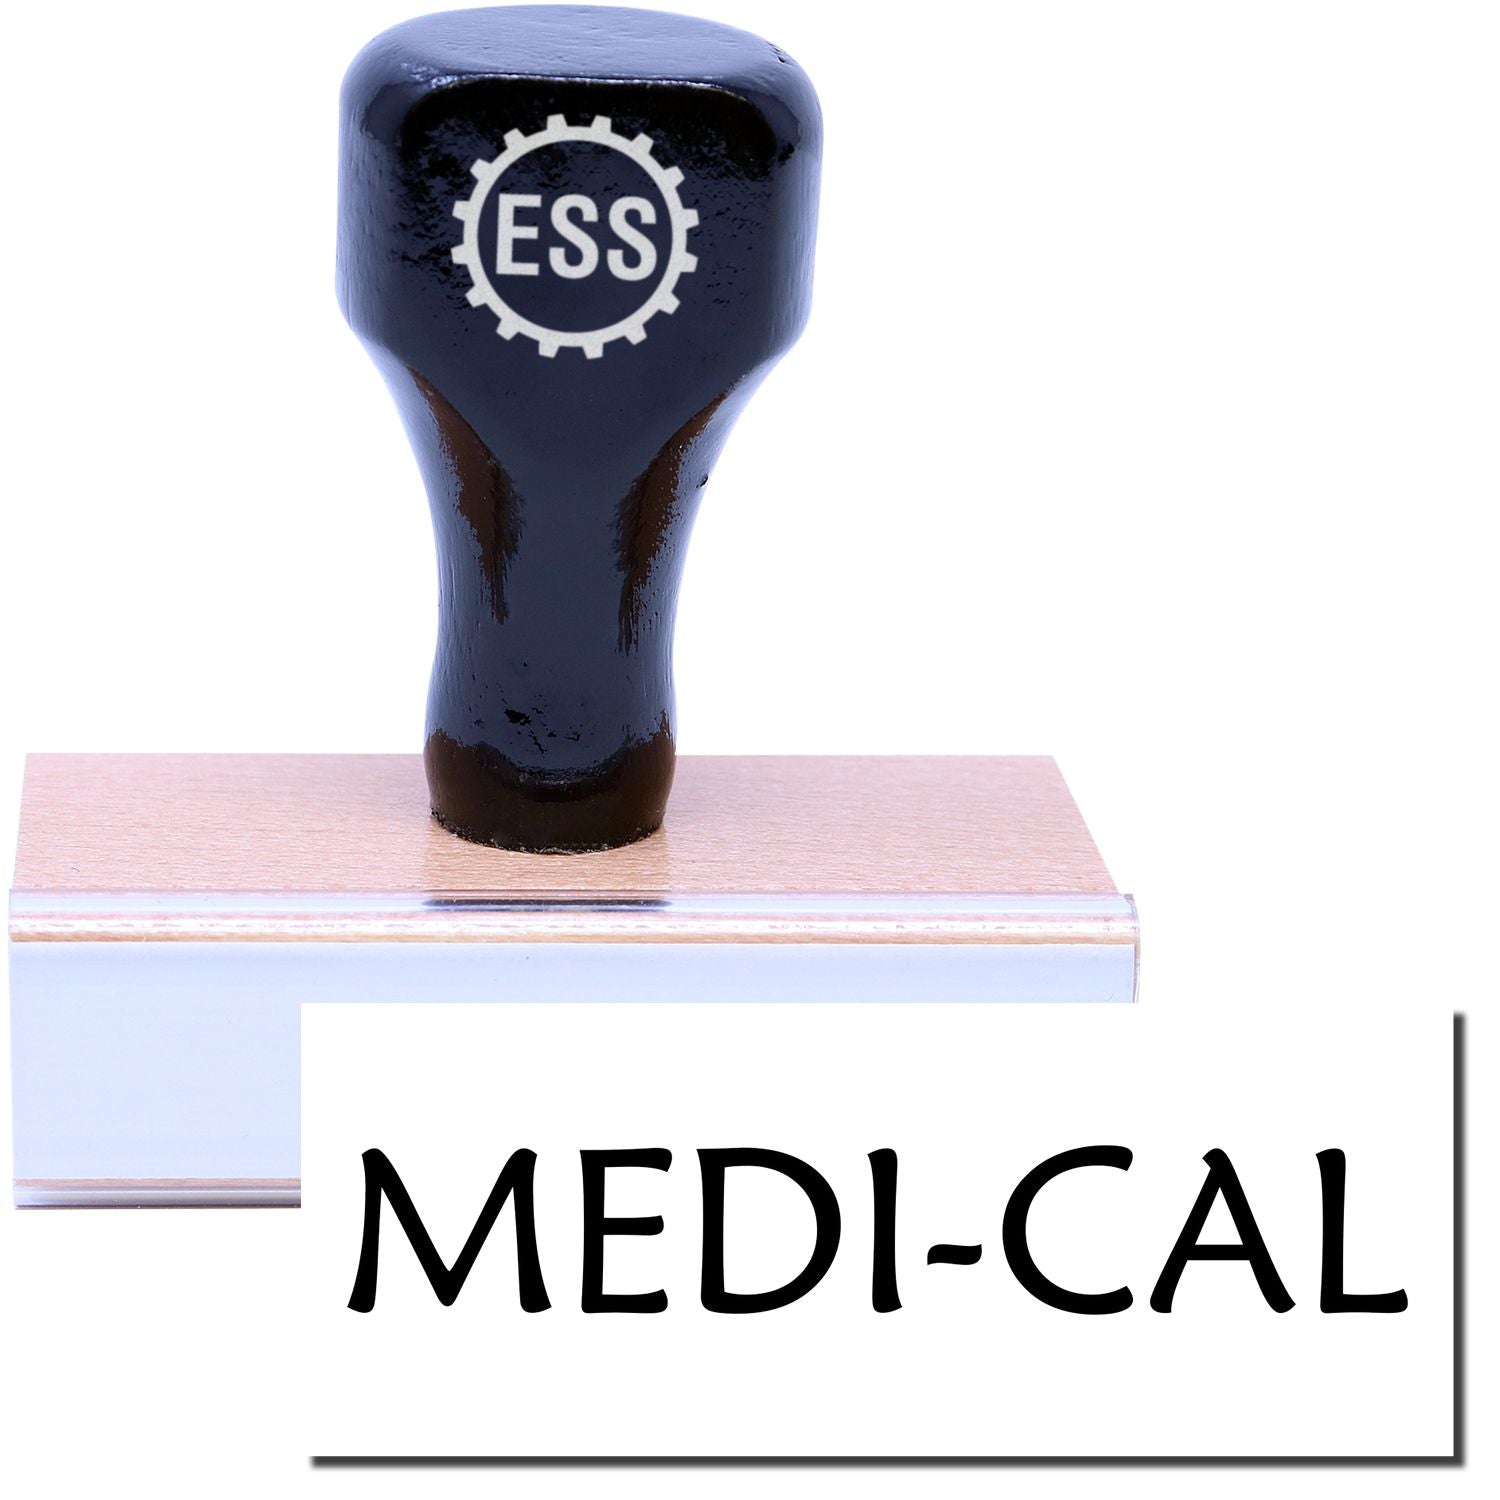 A stock office rubber stamp with a stamped image showing how the text "MEDI-CAL" in a large font is displayed after stamping.